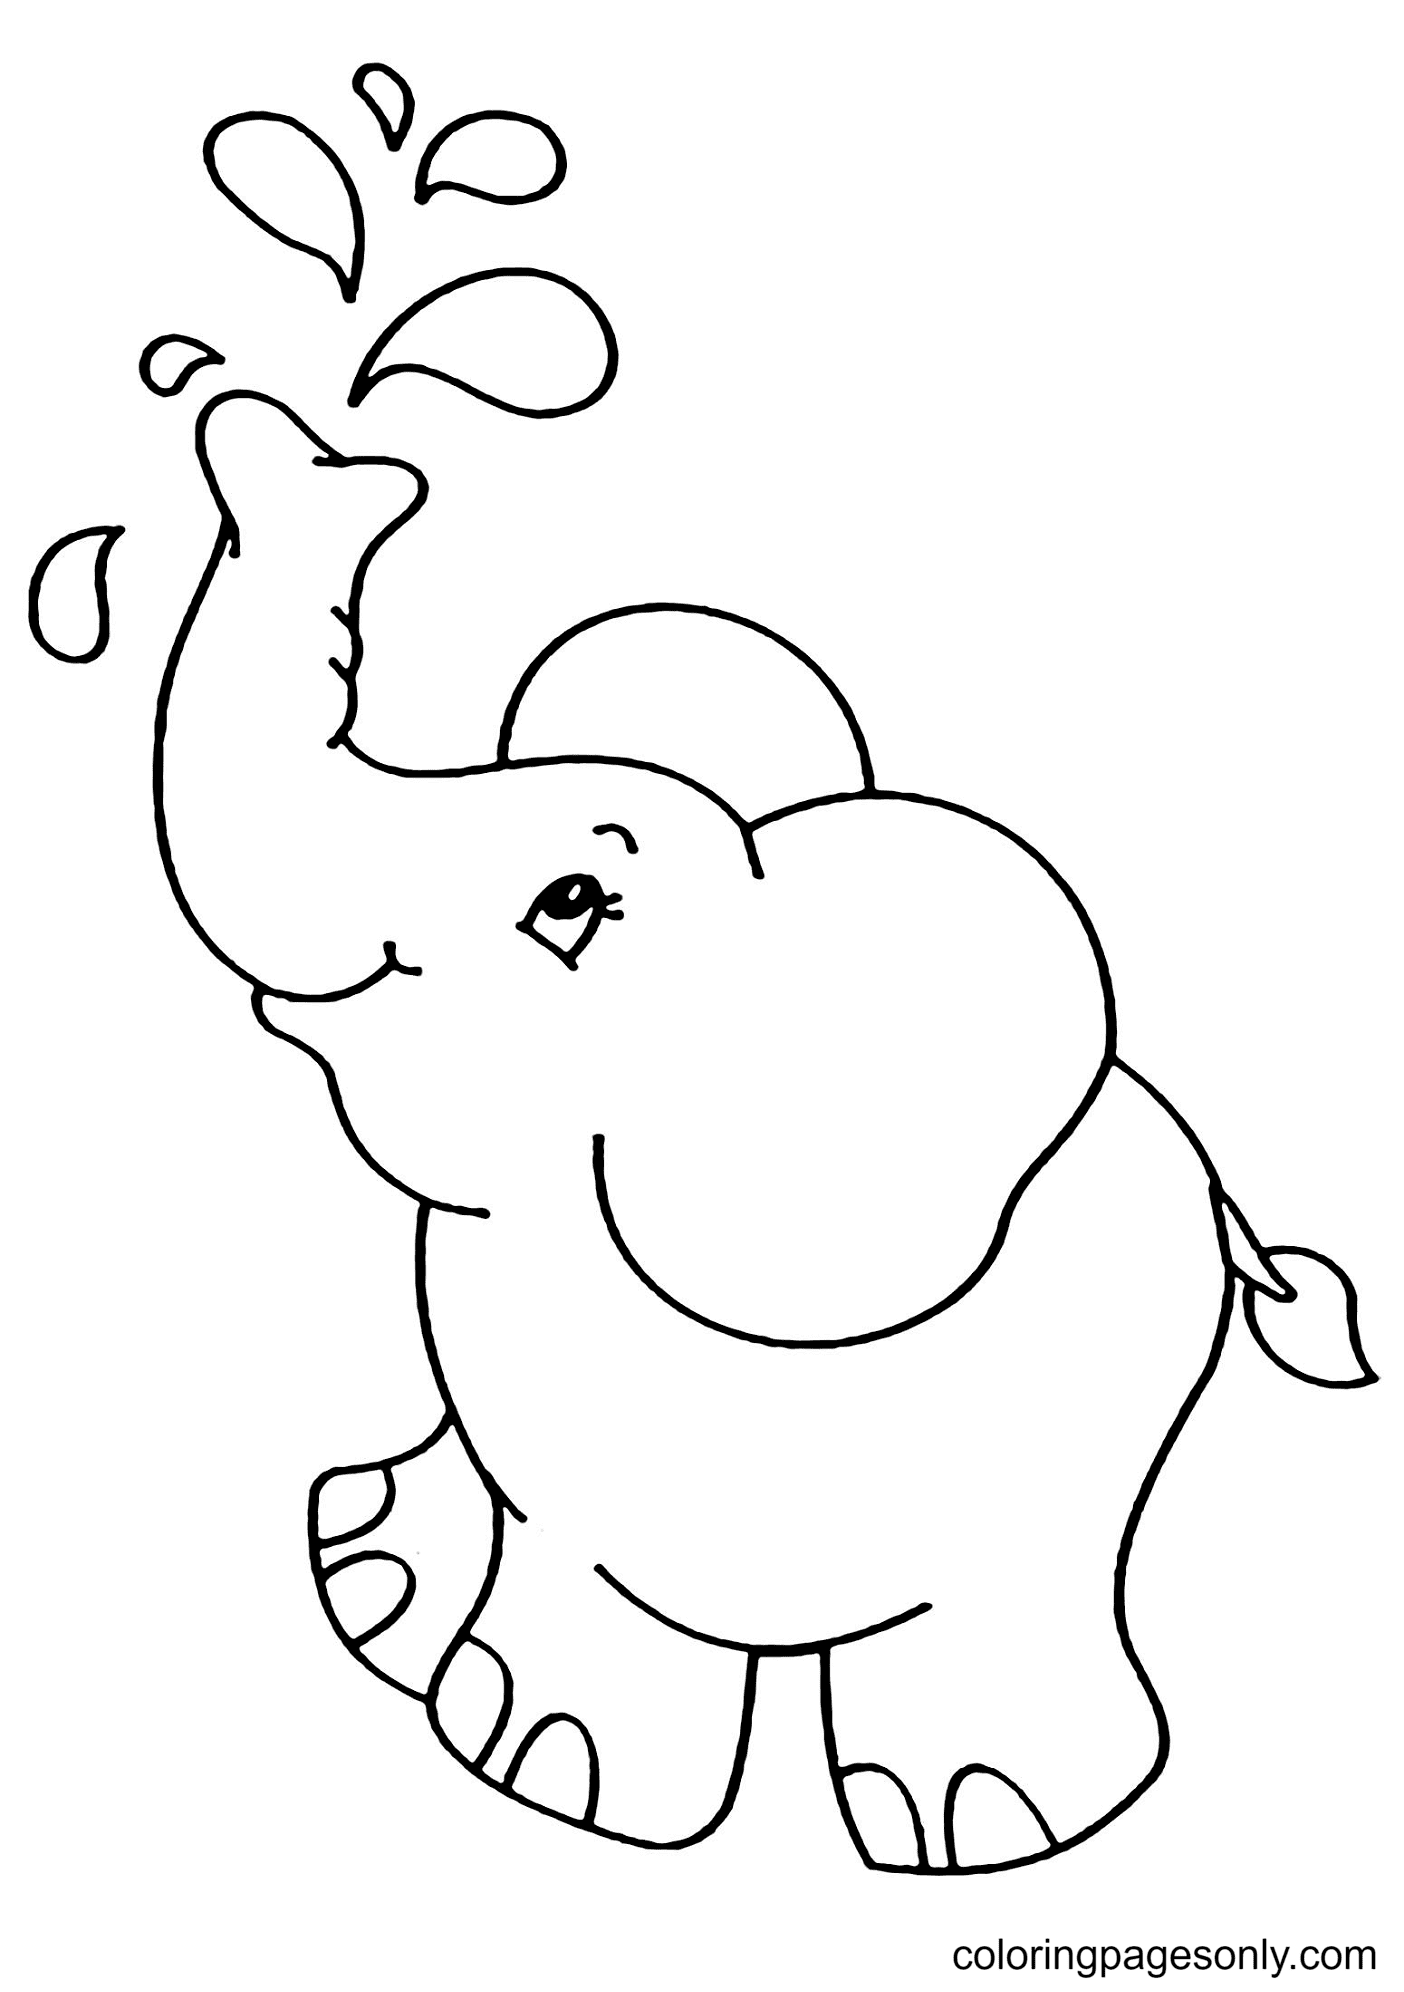 Lovely Little Elephant Coloring Page